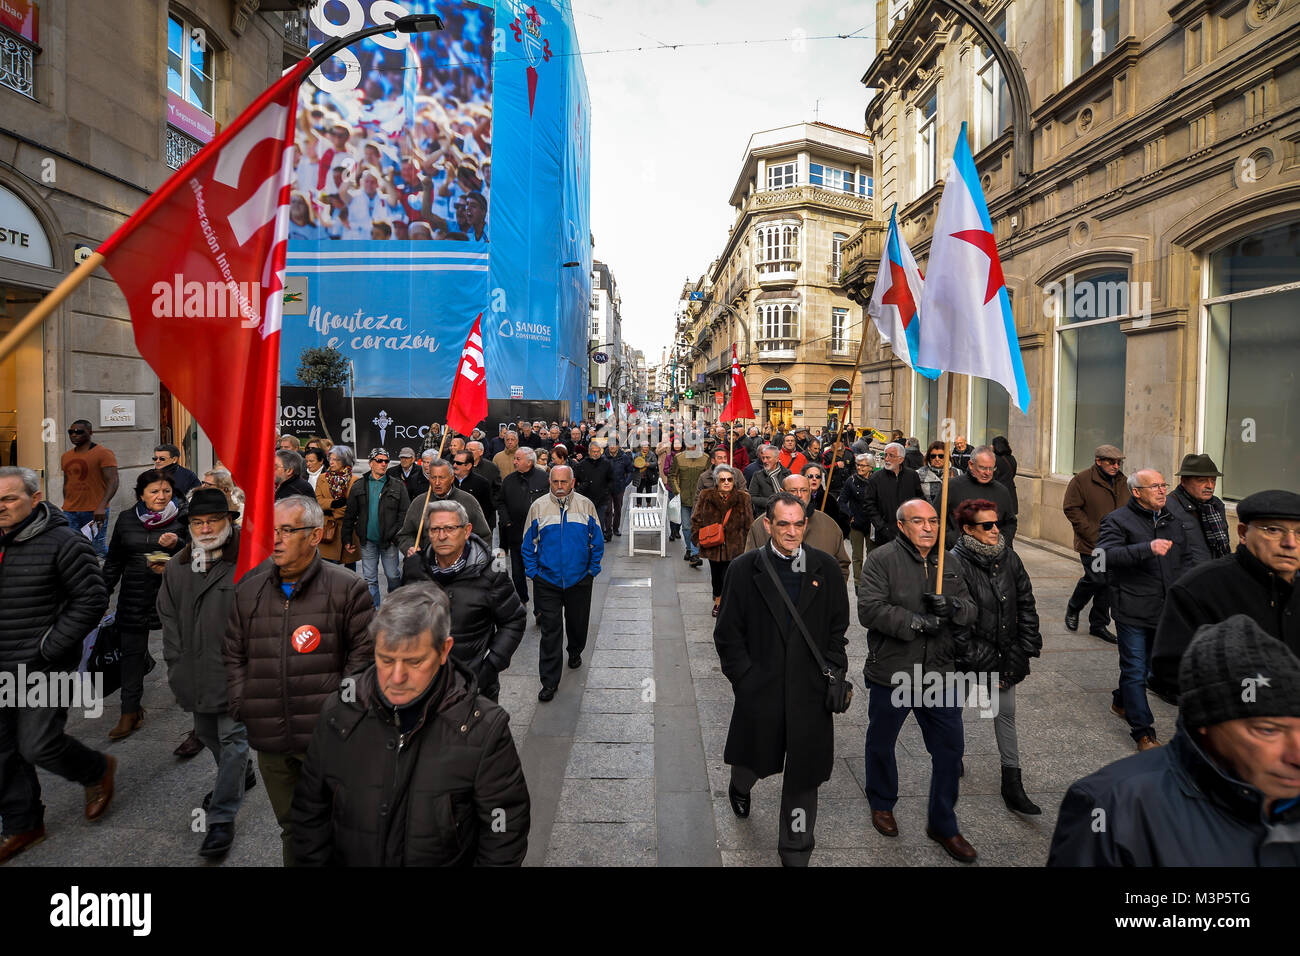 Protest March in defence of pensions - Vigo, Spain - 7th Feb 2018 Stock Photo